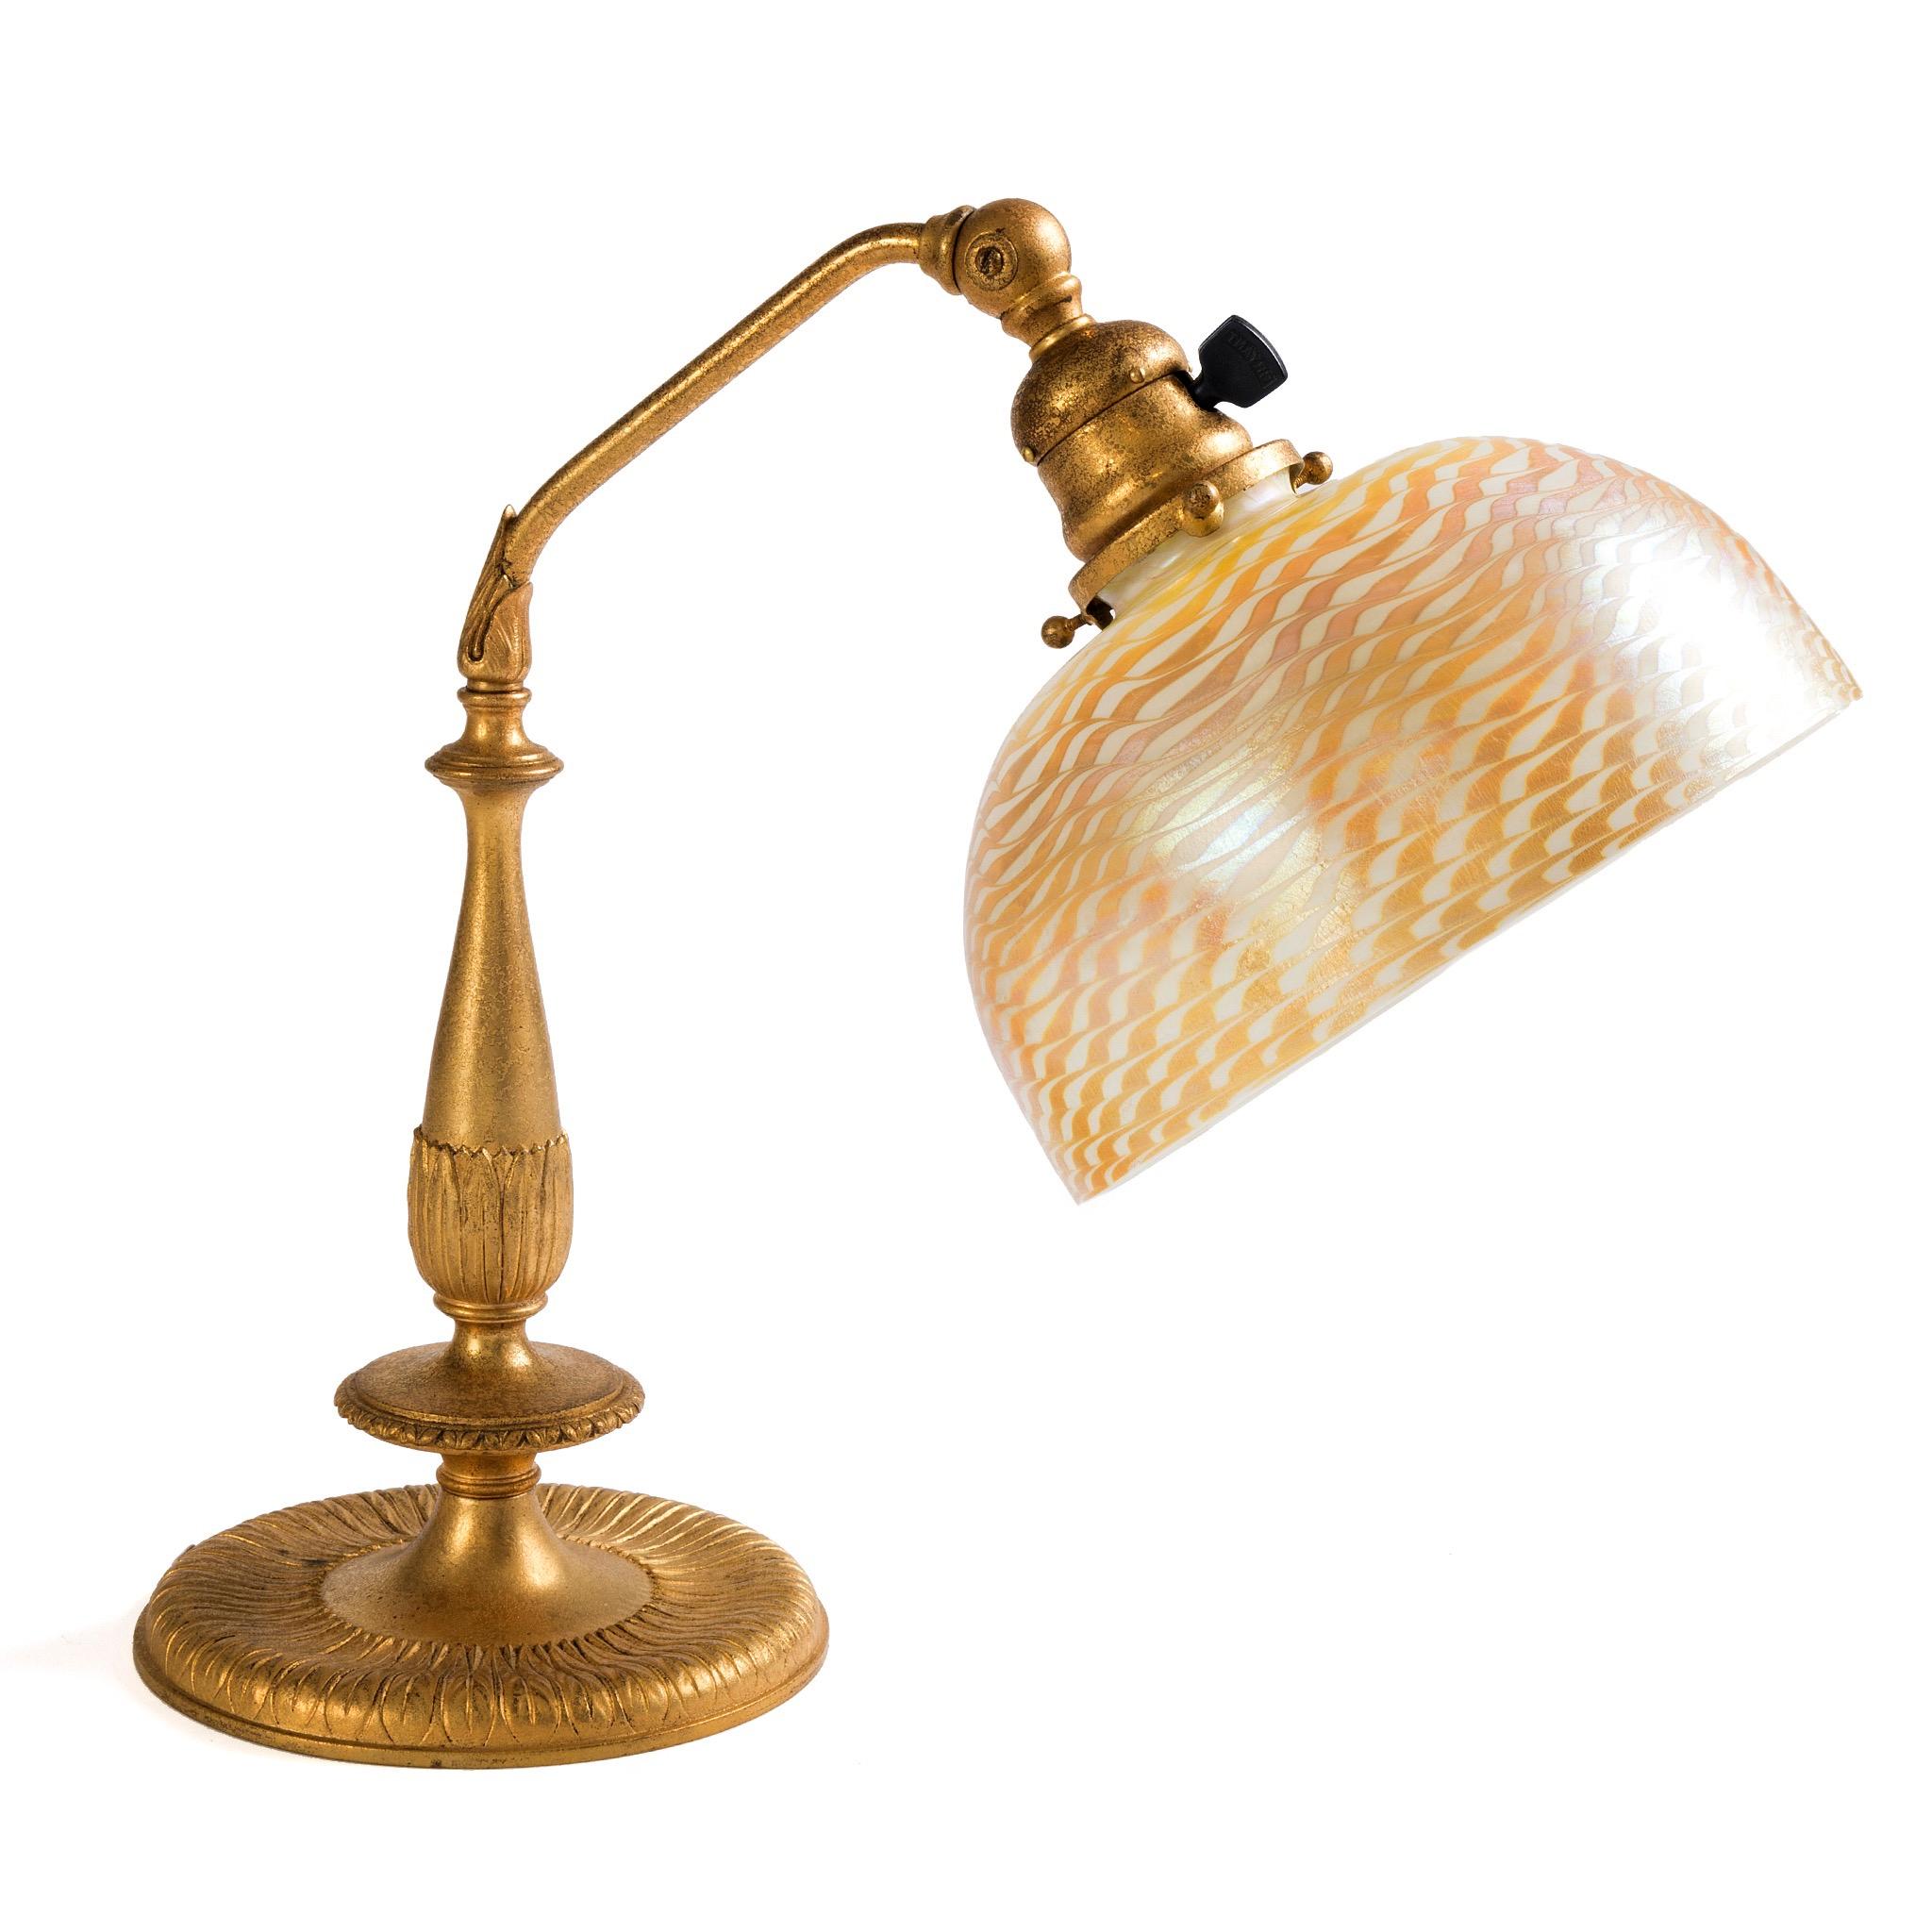 This delicately sized Tiffany Studios New York “Damascene” lamp is superbly colored in blood-orange and gold. Trails of blood orange glass were applied obliquely then combed through to create a stunning waved pattern. The Damascus lamps were named